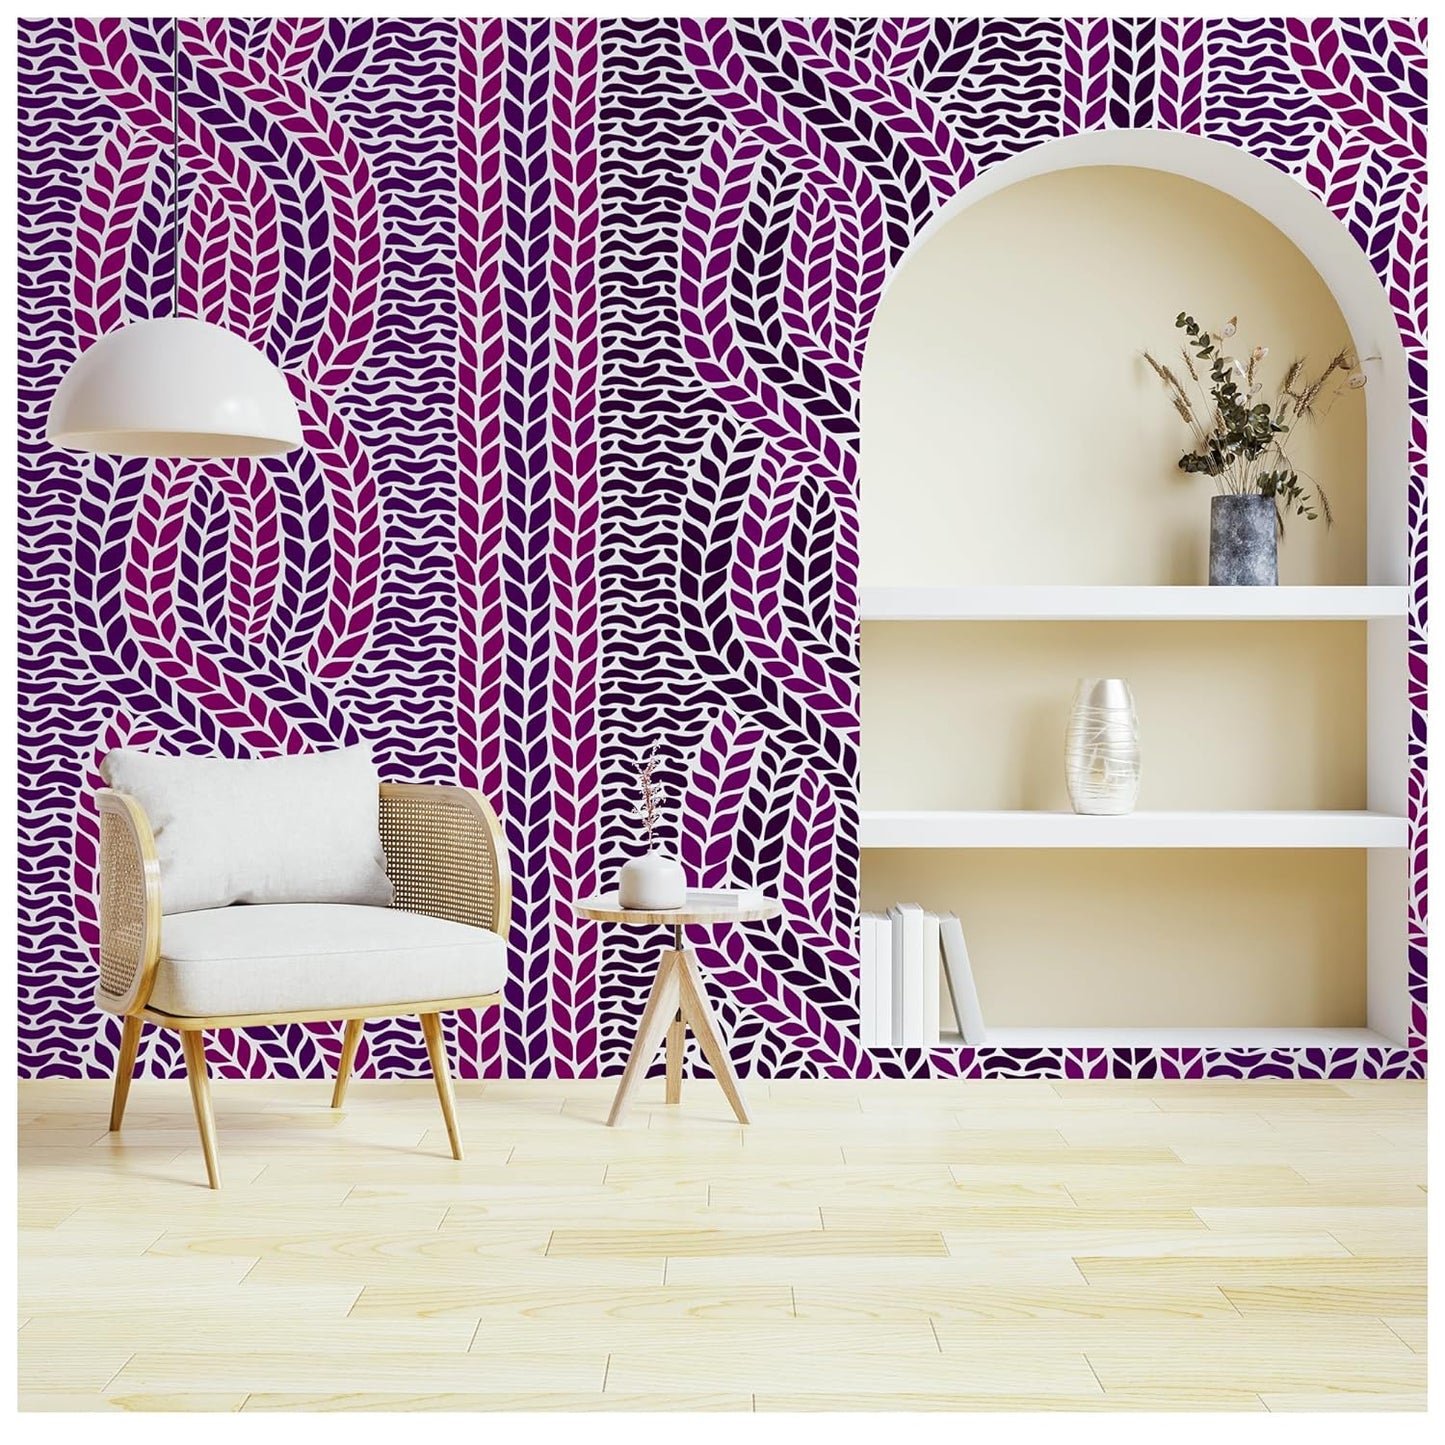 Latest Large Rope Allover Paint Wall Design Stencil